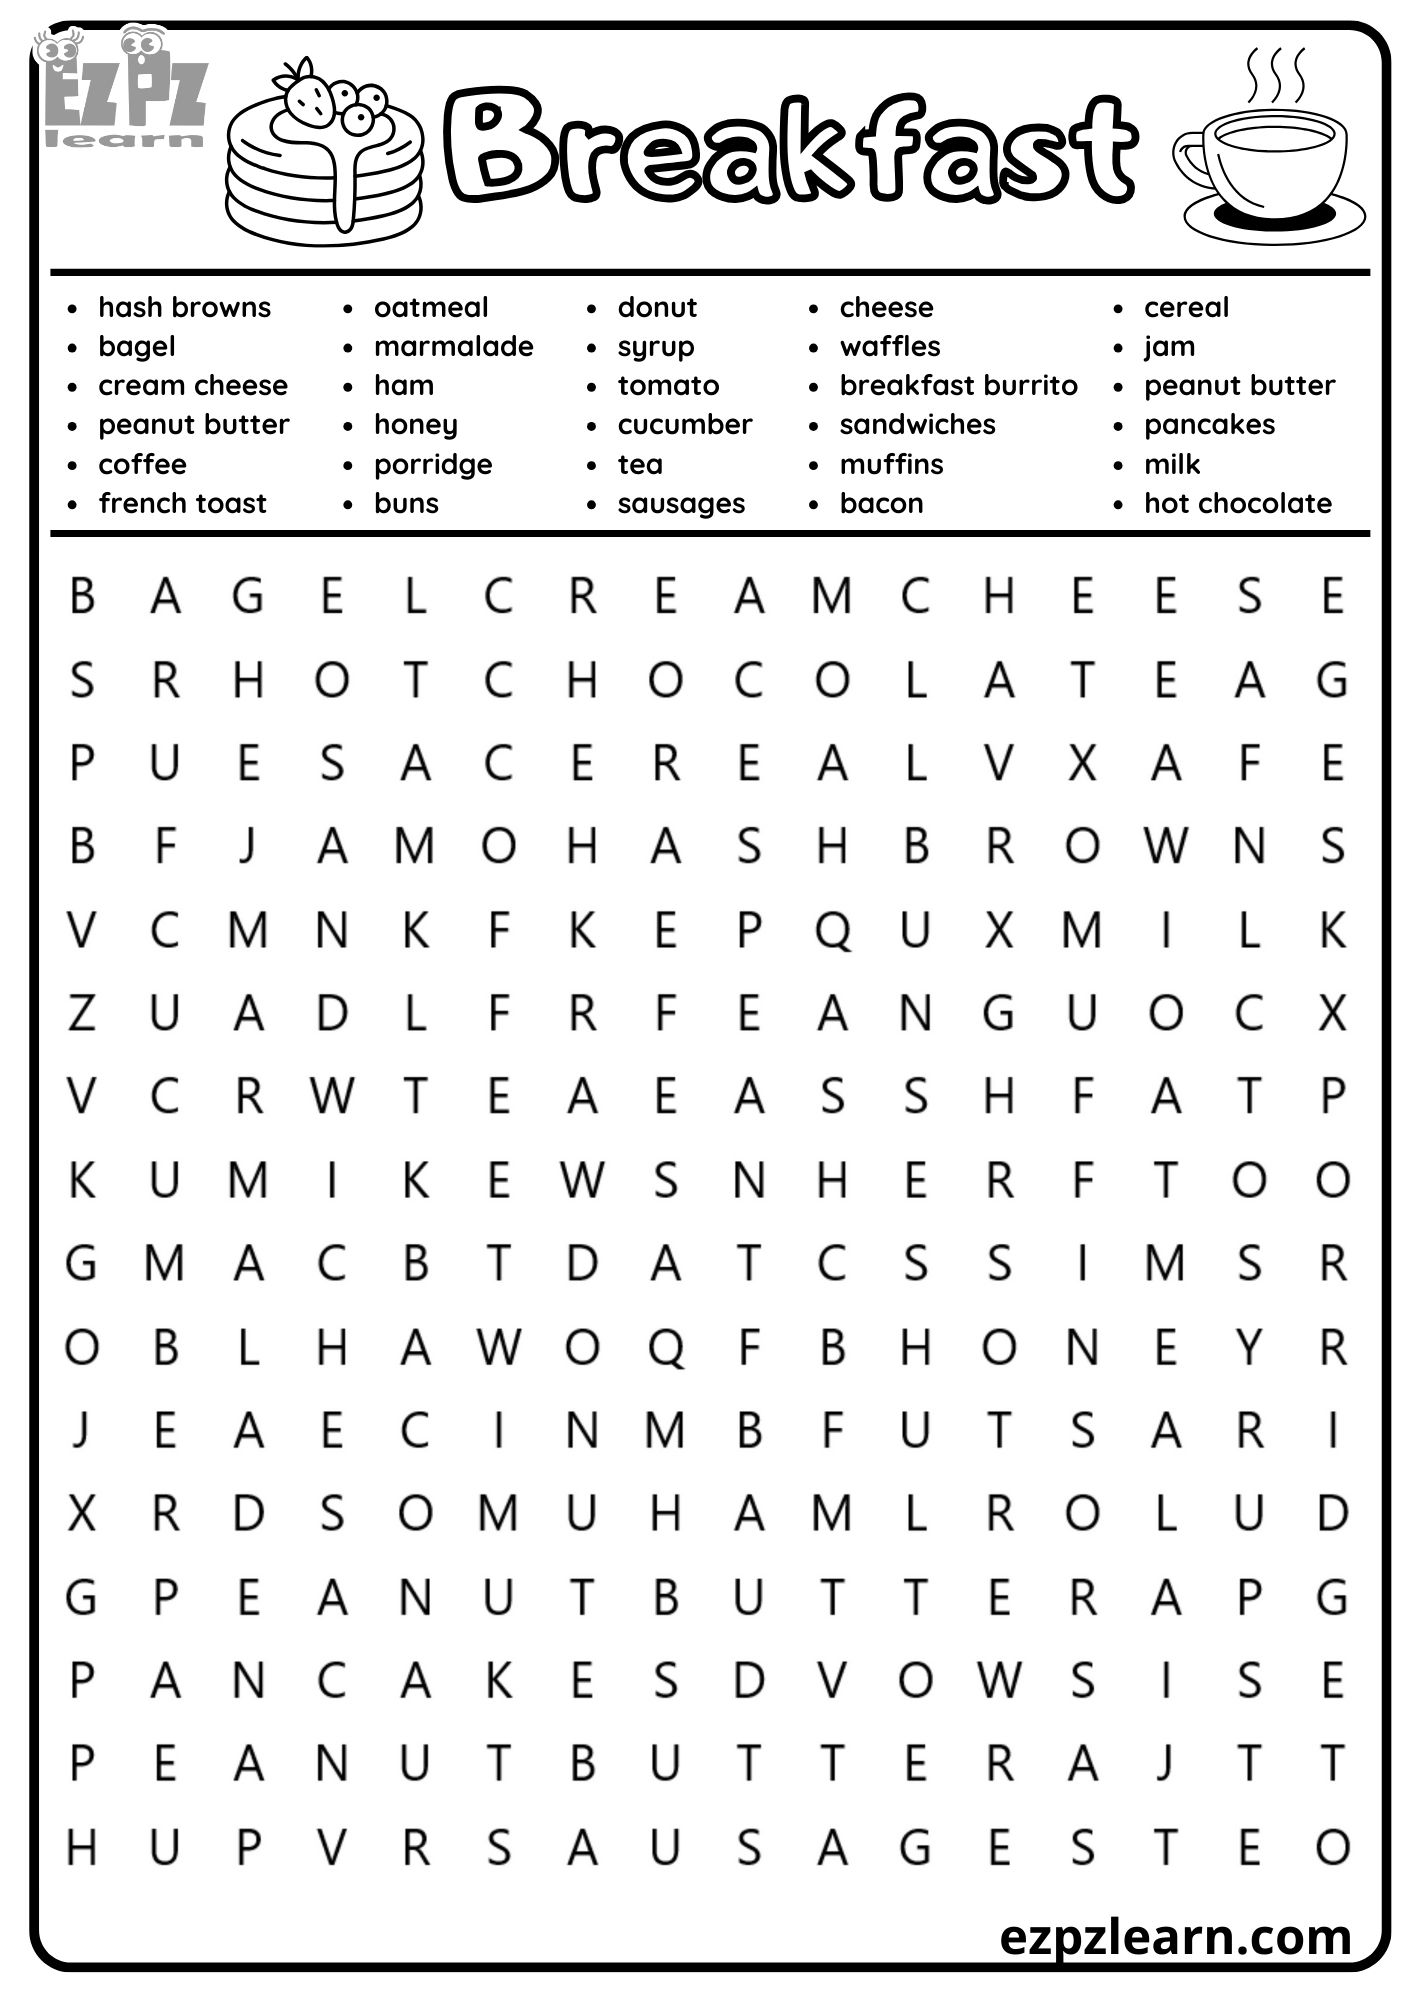 Breakfast Food Vocabulary Word Search for Kids, Adults and ESL Students ...